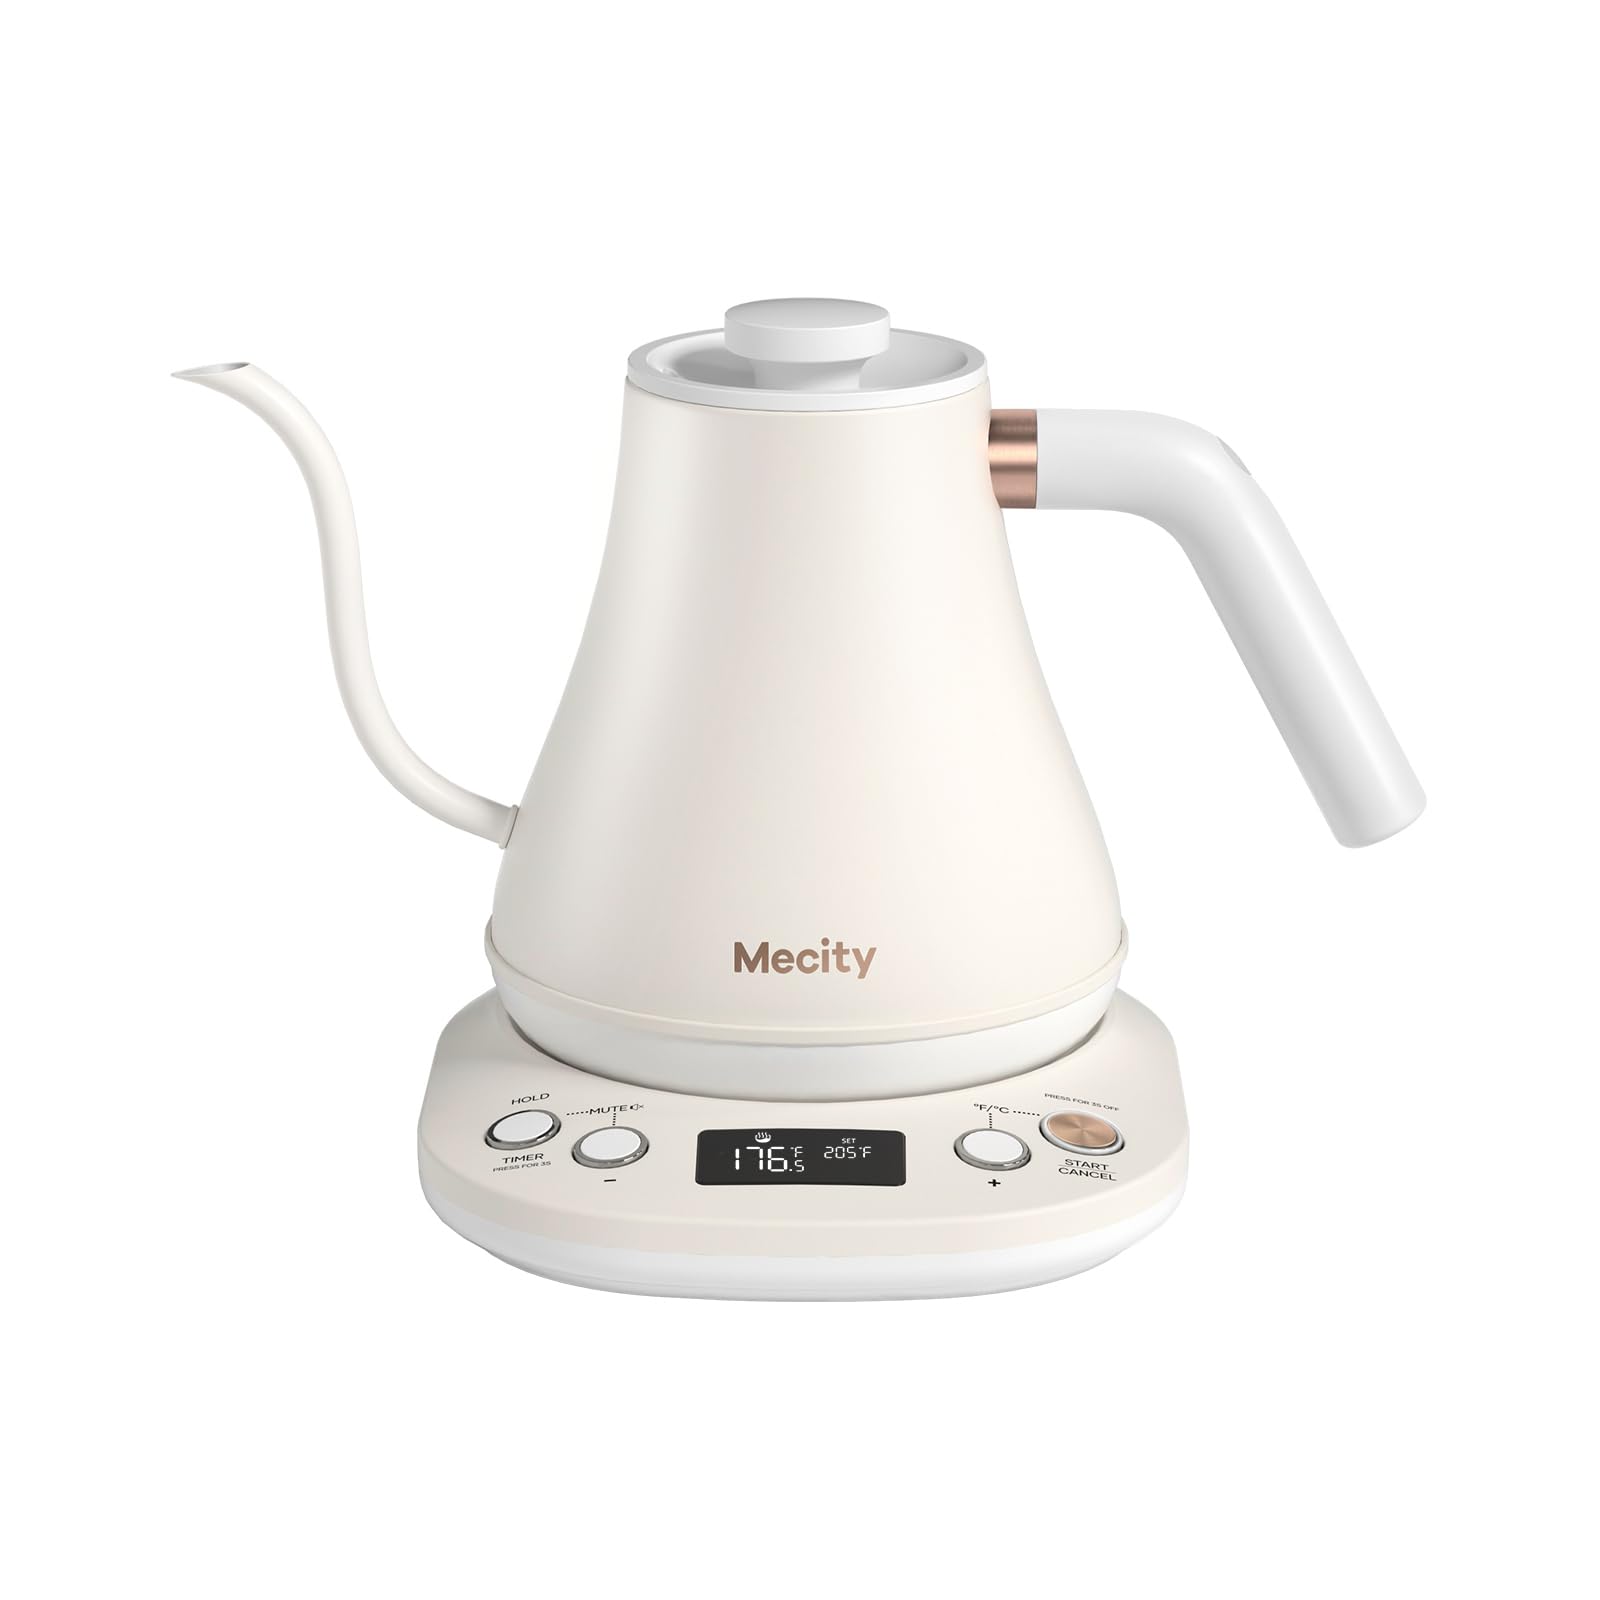 Mecity Electric Gooseneck Kettle With Keep Warm Function & LCD Display Automatic Shut Off Coffee Kettle Temperature Control Pour Over Kettle 1200 Watt, 0.8L, 120V, Milk White